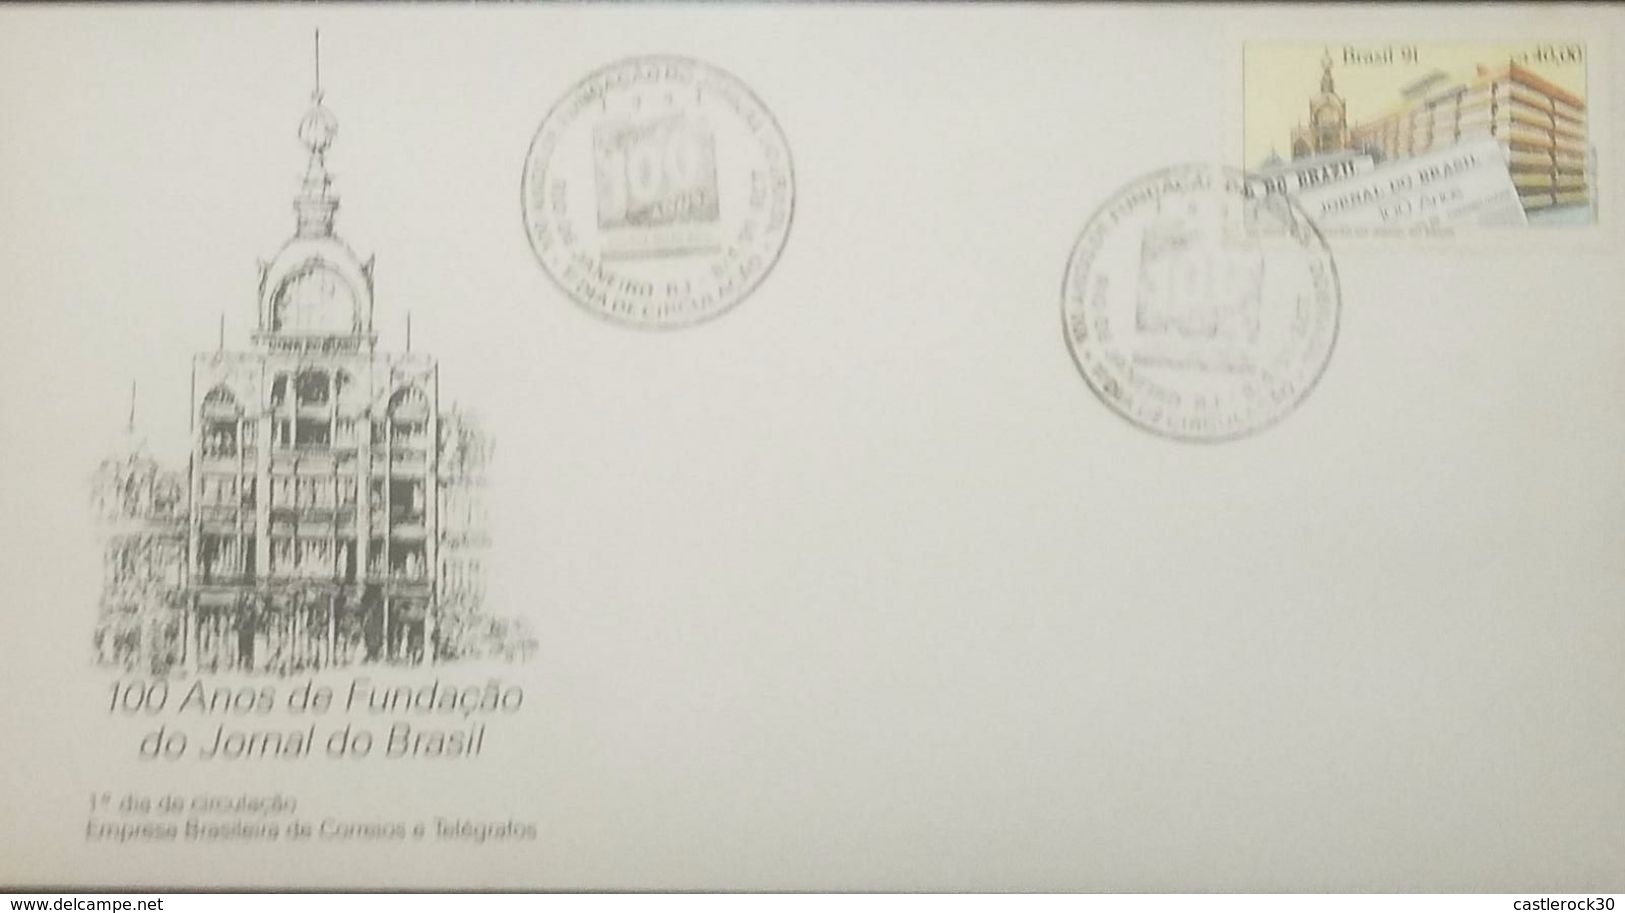 L) 1991 BRAZIL, 100 YEARS OF FOUNDATION OF THE BRAZIL JOURNAL, ARCHITECTURE, NEWSPAPER, FDC, XF - FDC